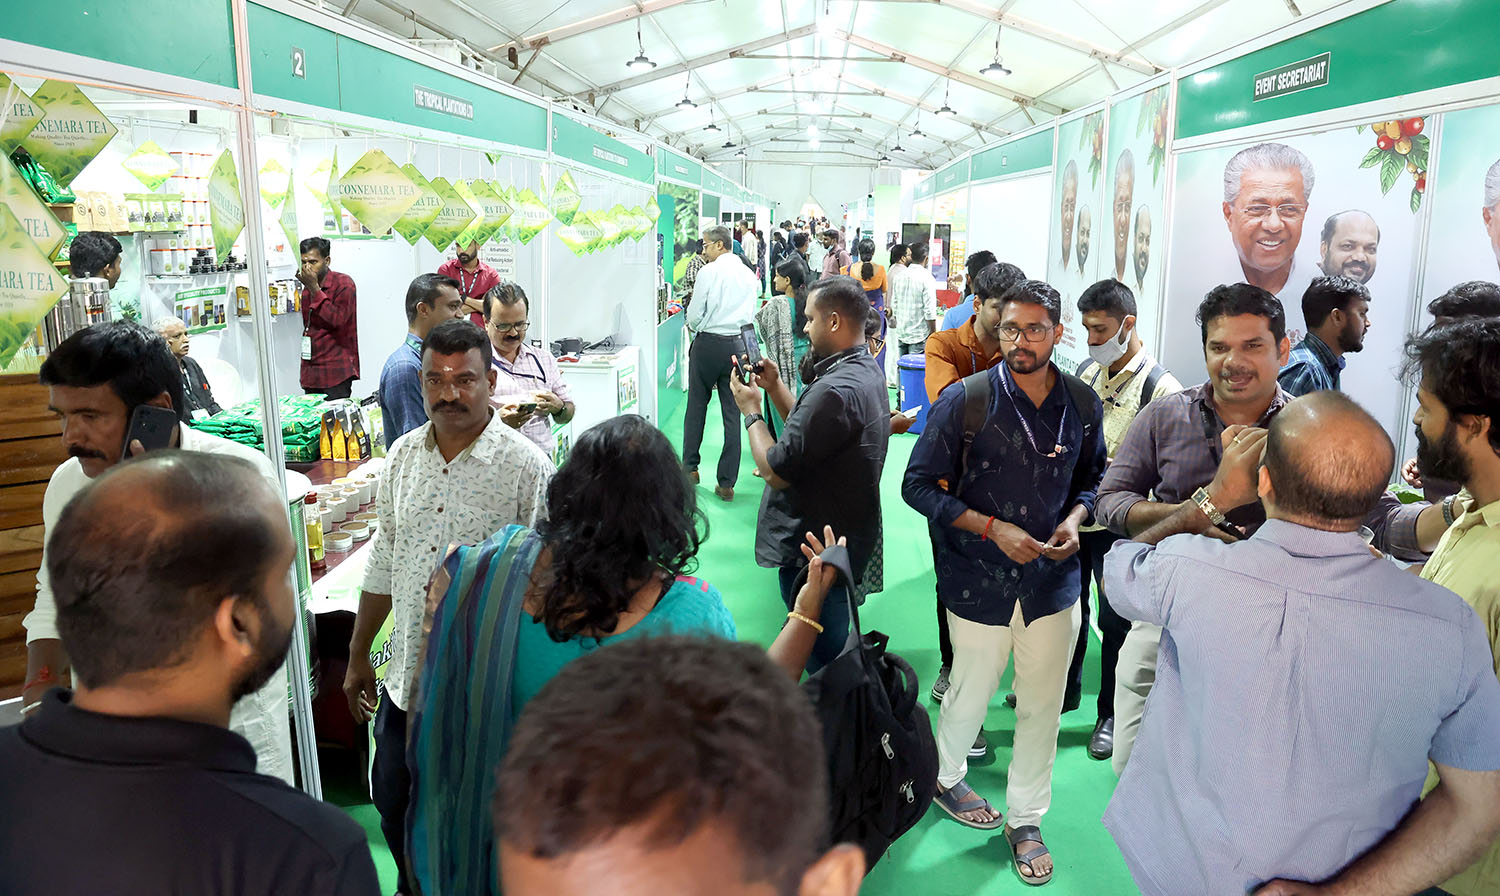 Plantation expo draws big crowd; on display are diverse delights from estates